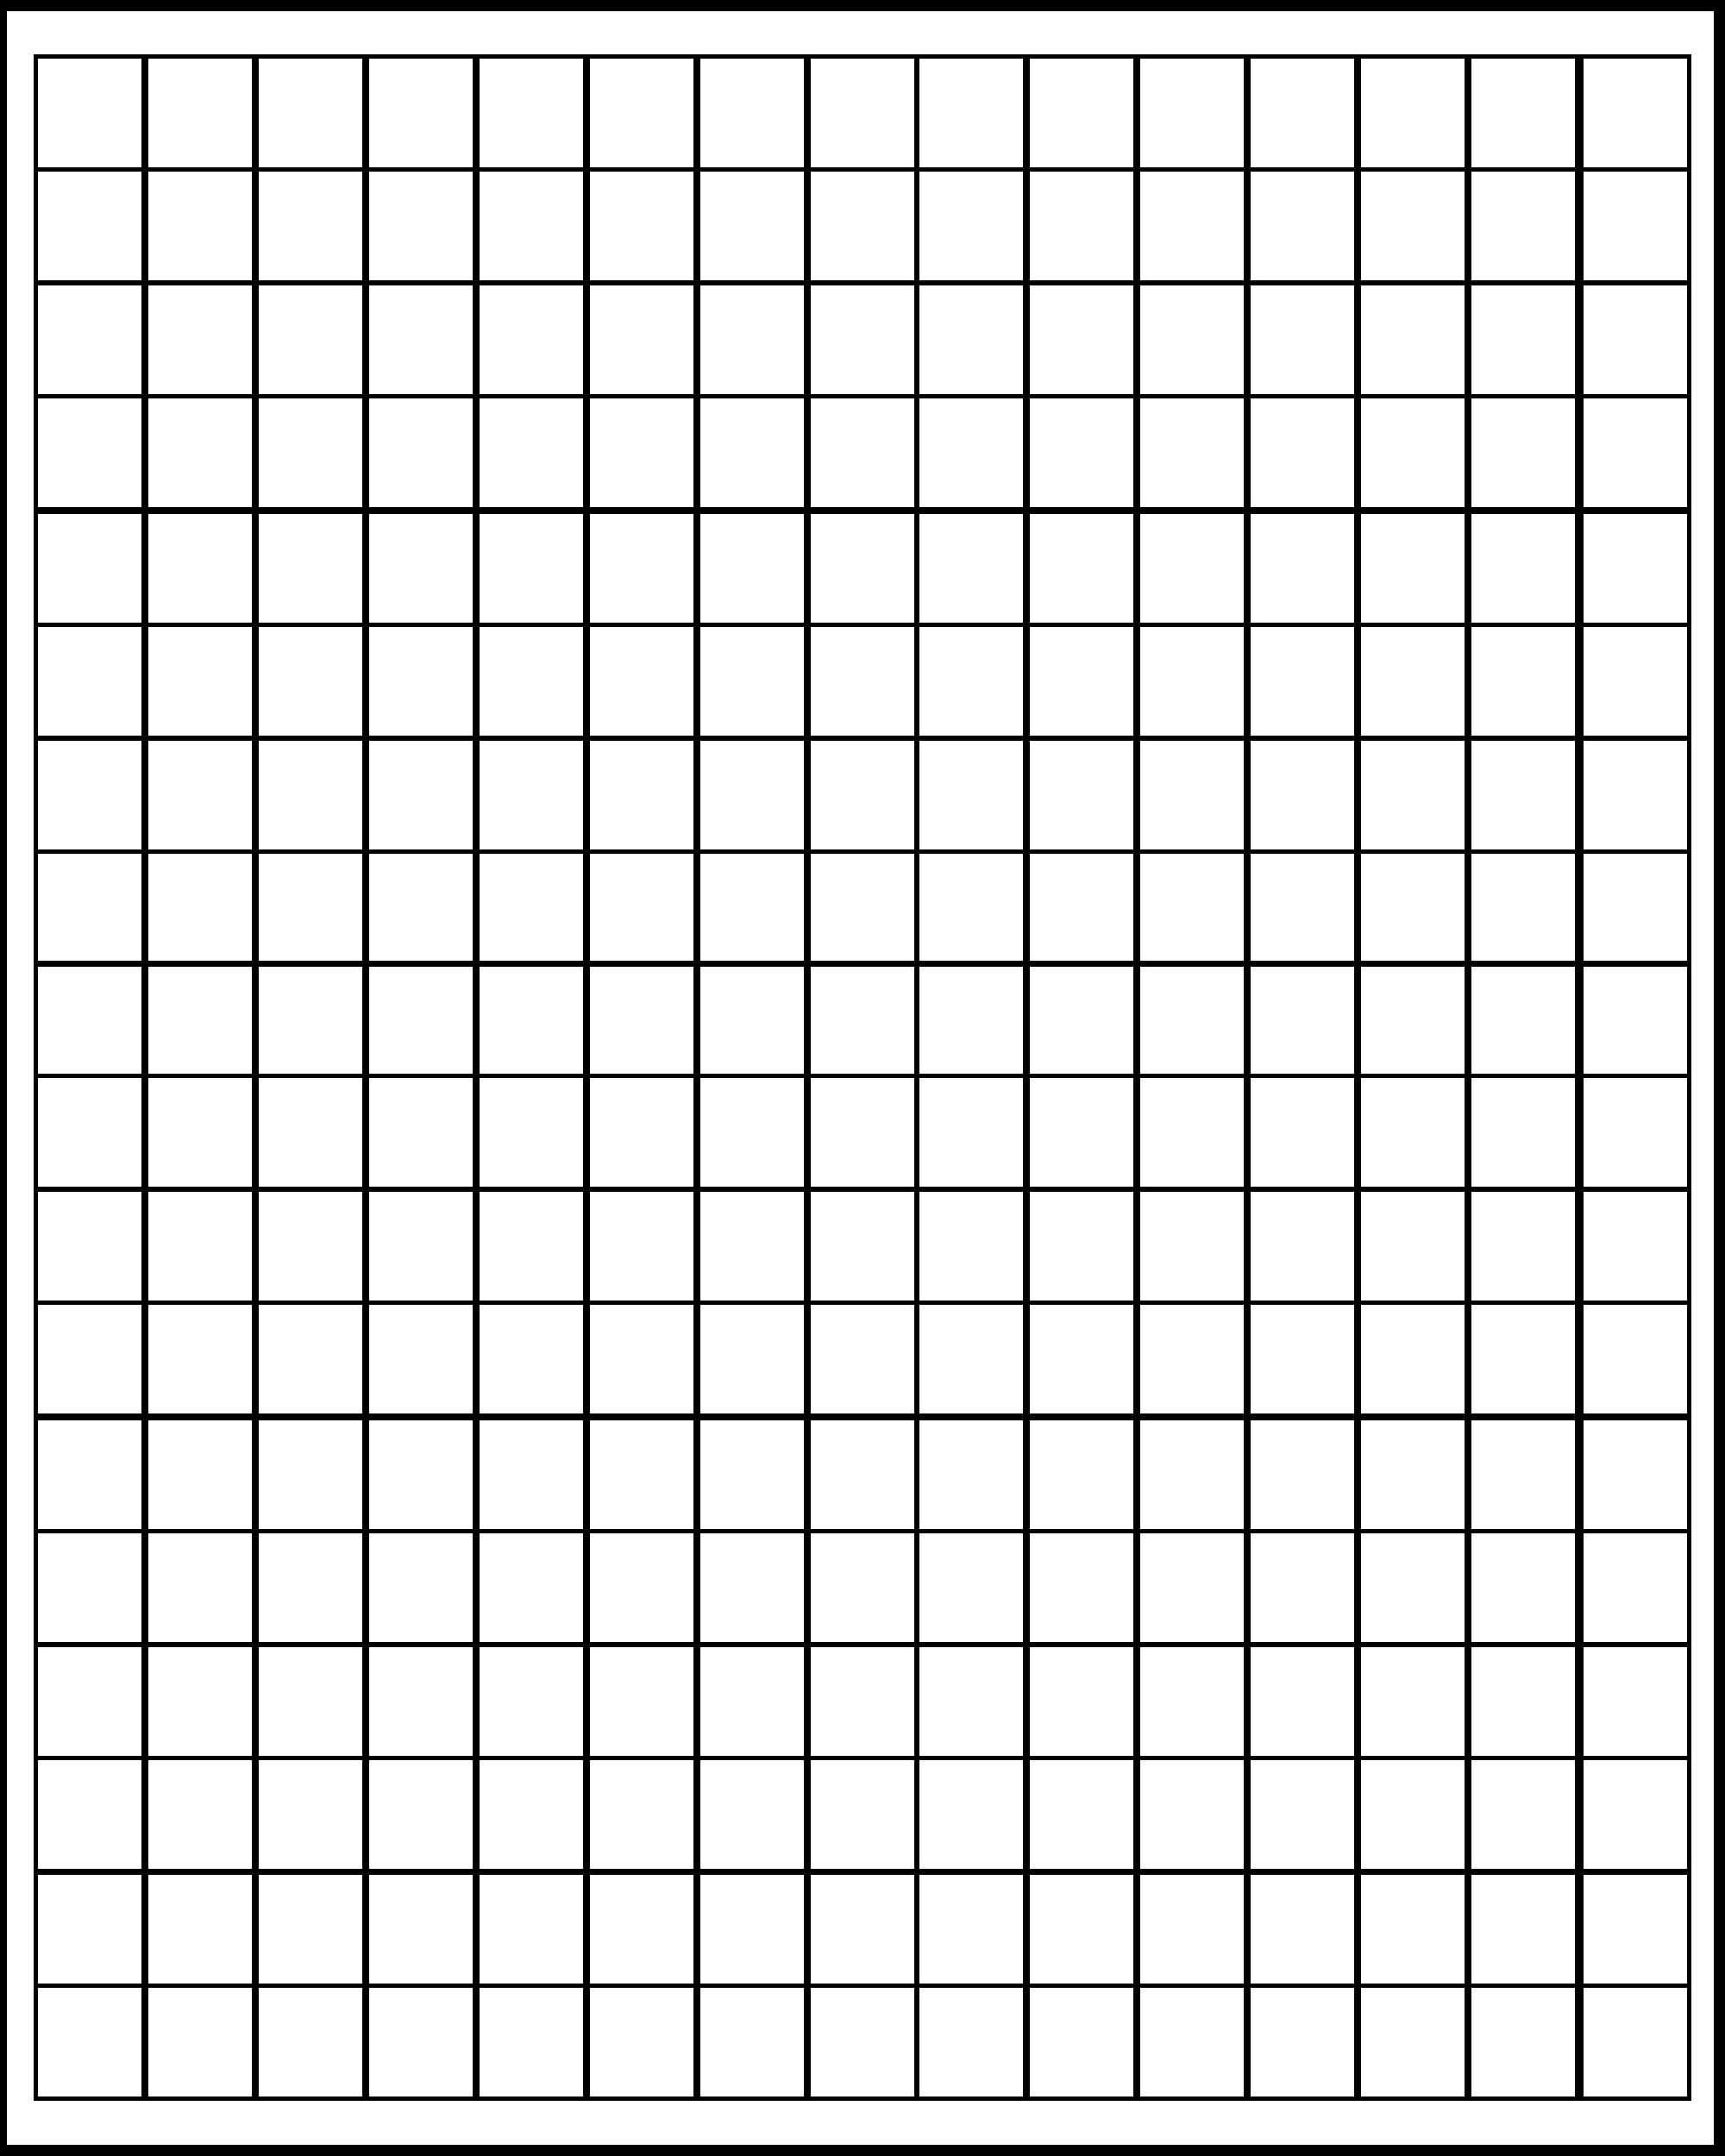 5+ Printable Large Graph Paper Templates HowToWiki